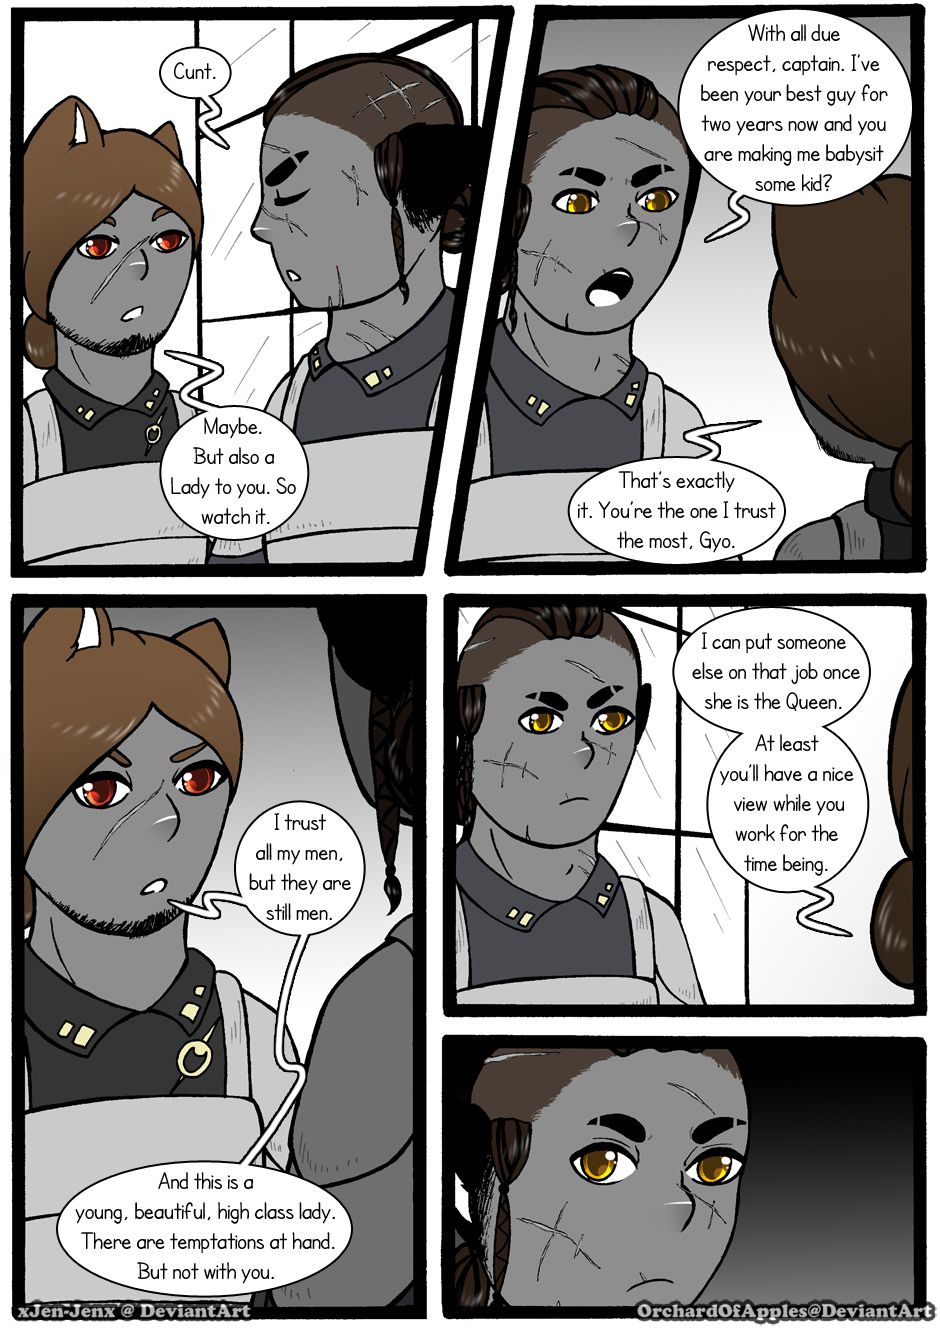 [Jeny-jen94] Between Kings and Queens [Ongoing] 202